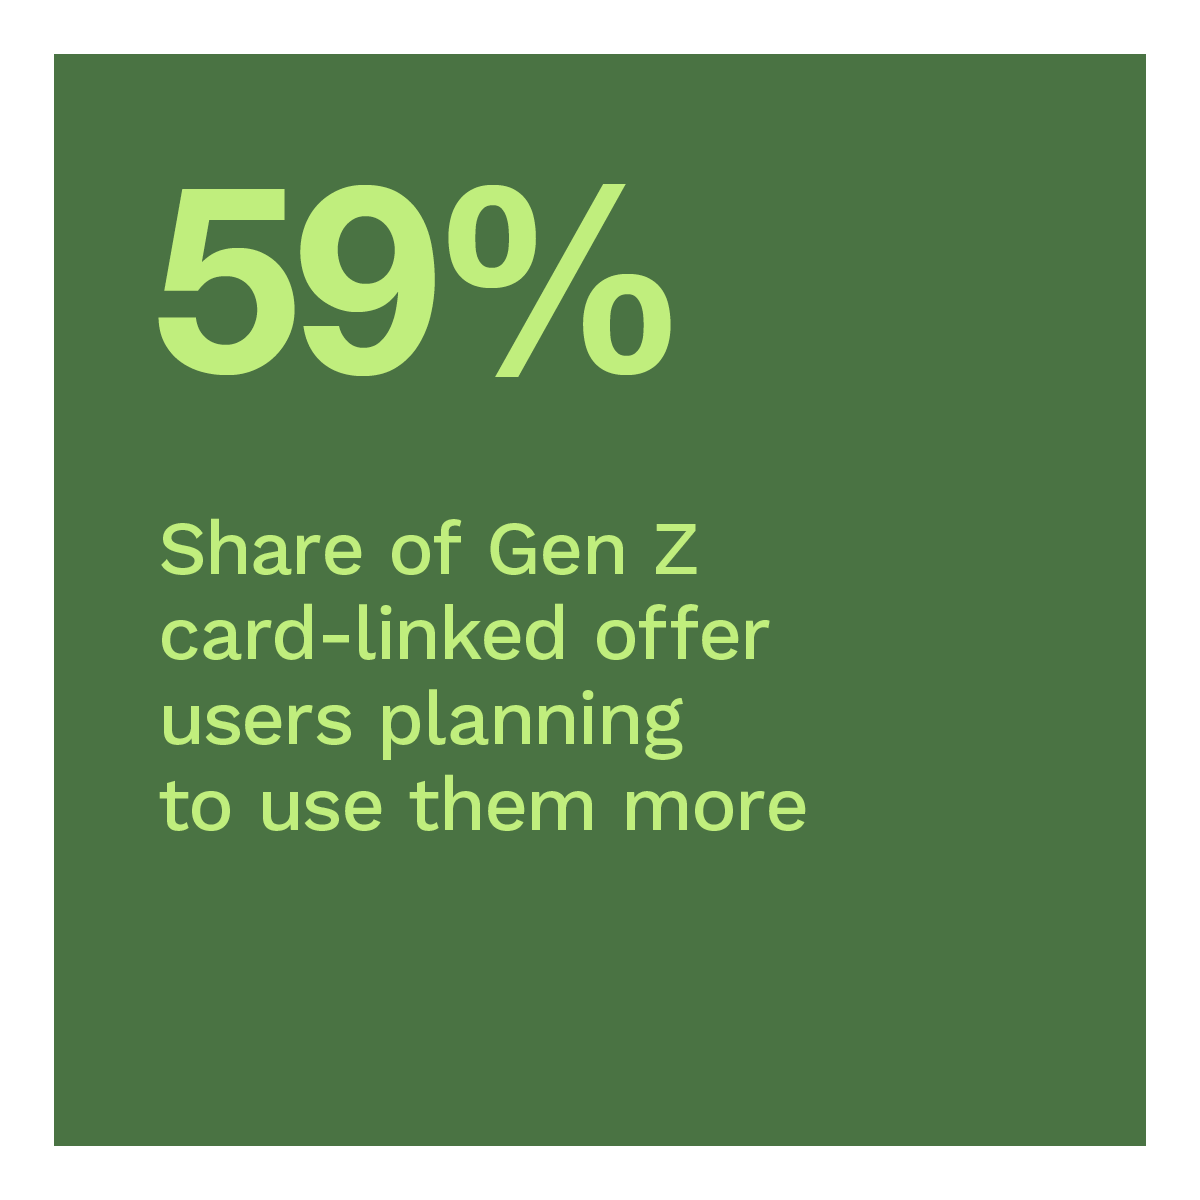 59%: Share of Gen Z card-linked offer users planning to use them more